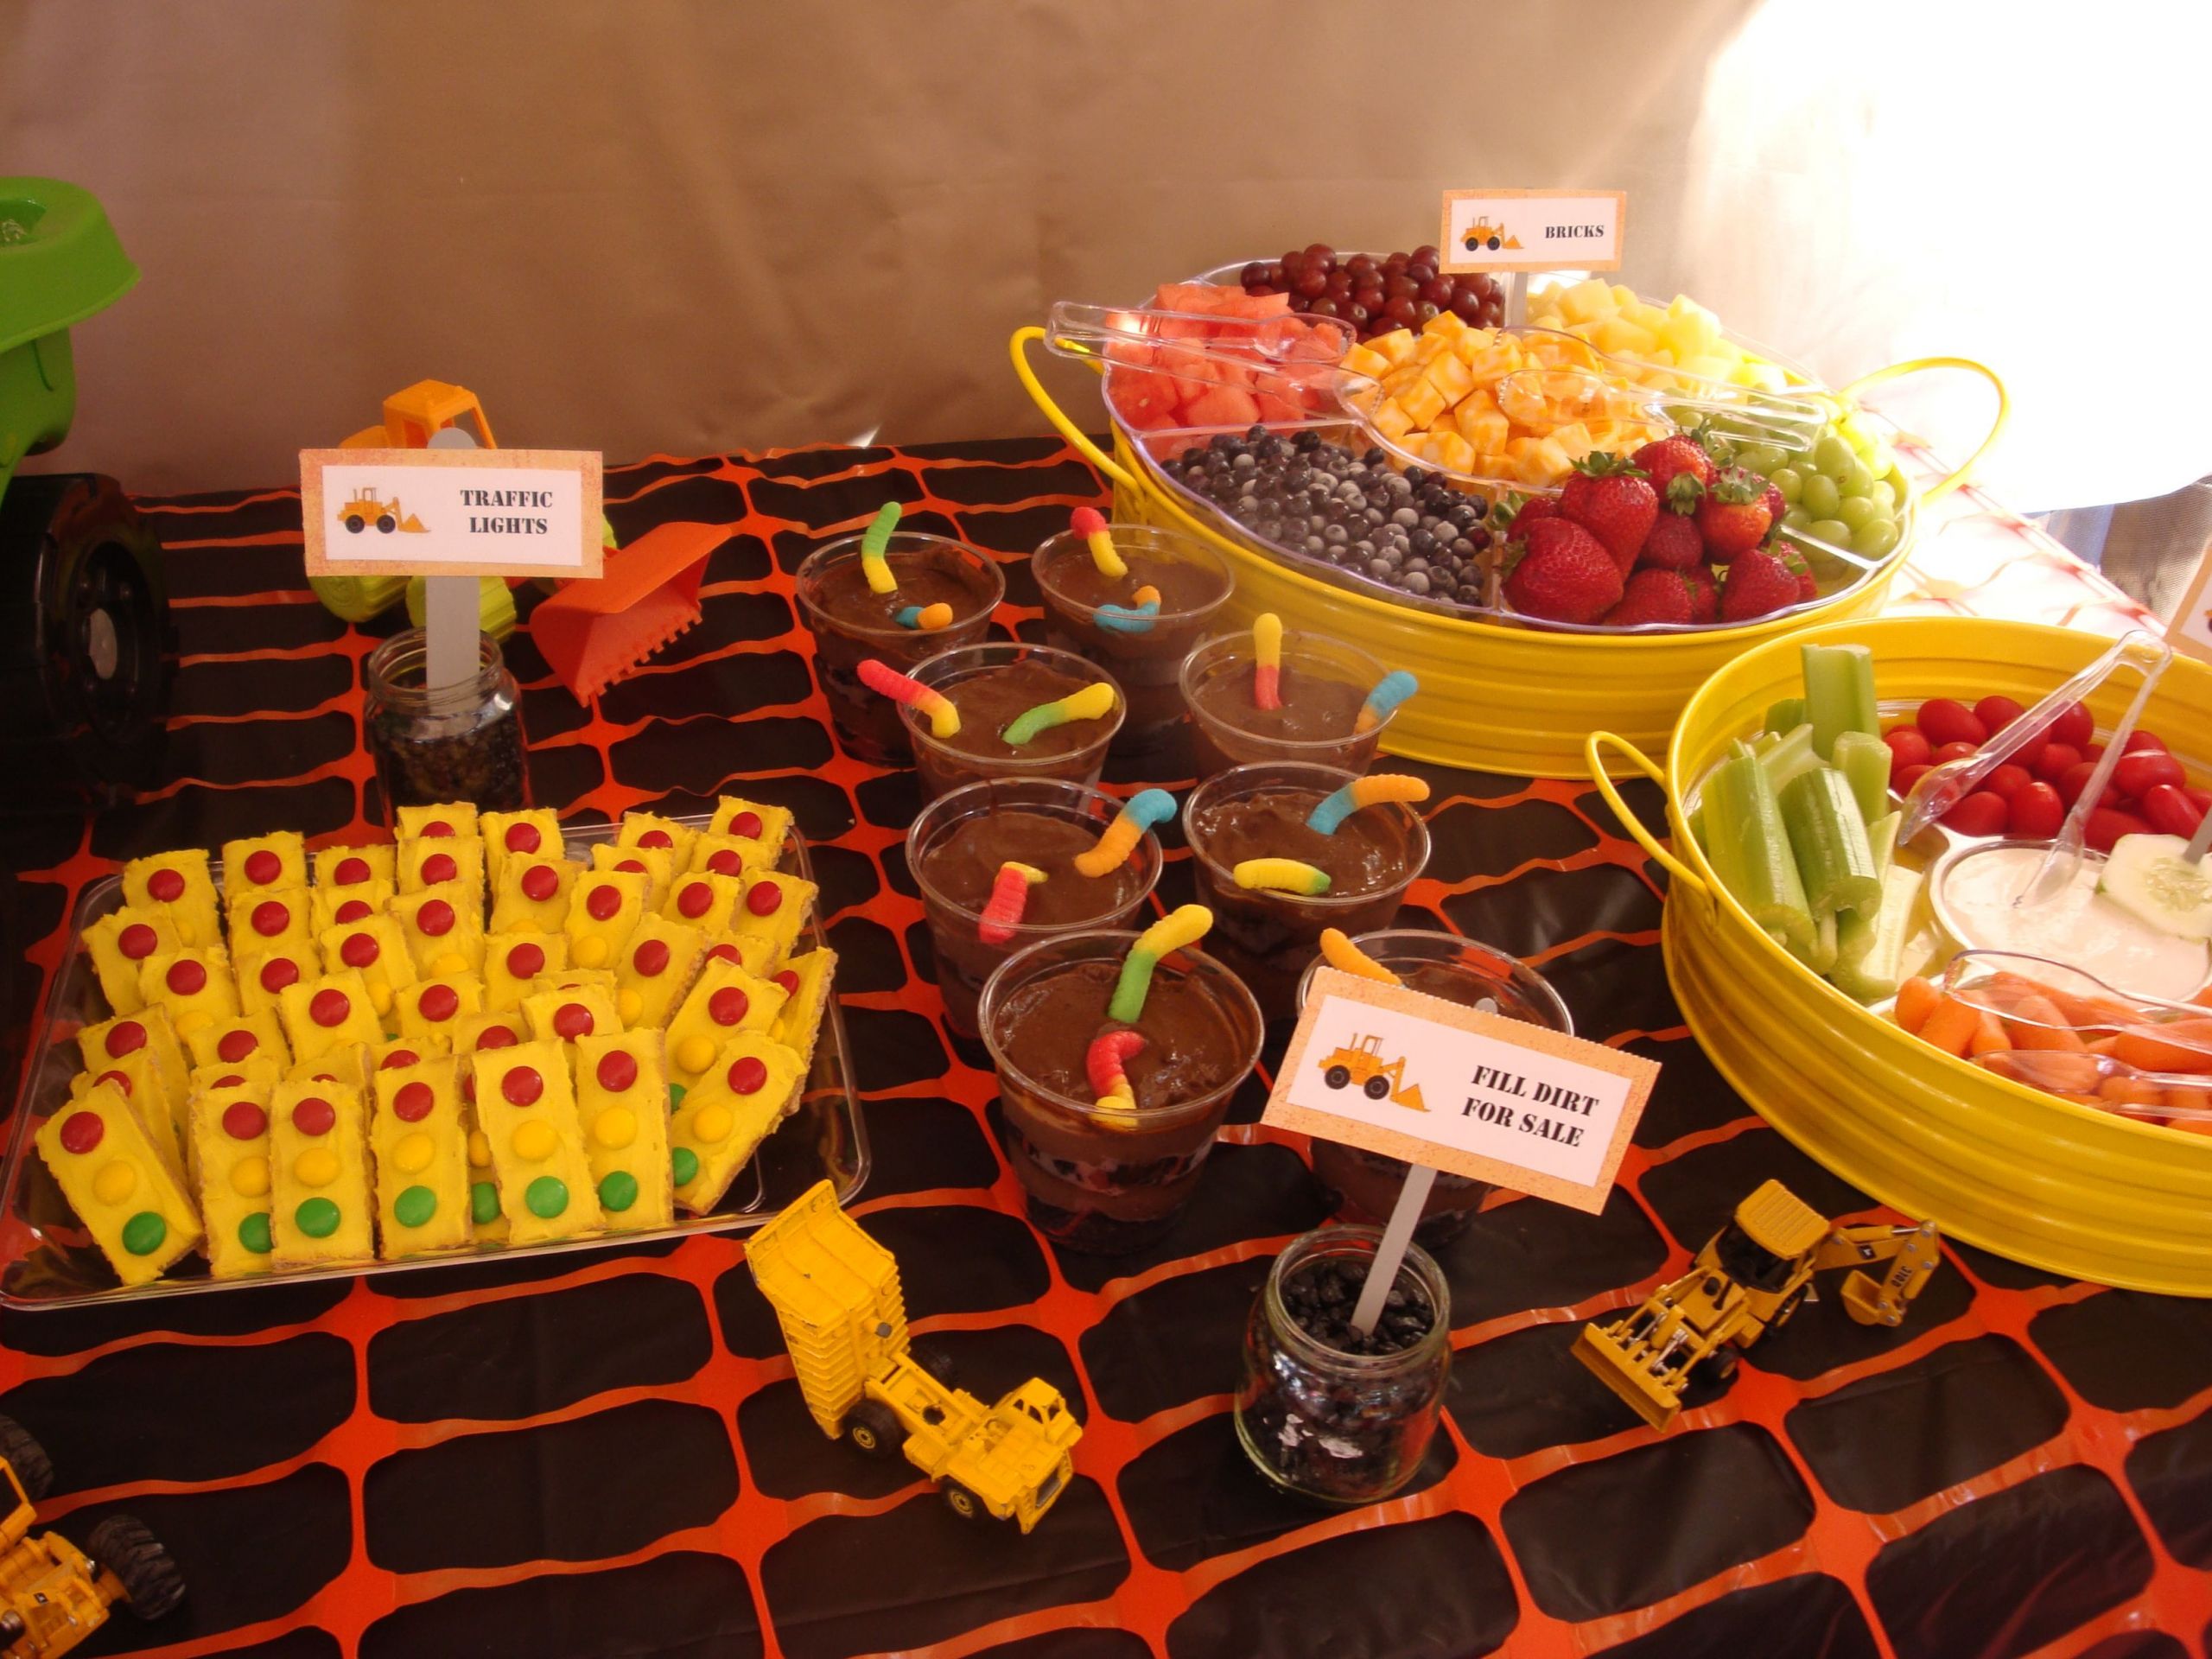 Construction Party Food Ideas
 food ideas construction theme party